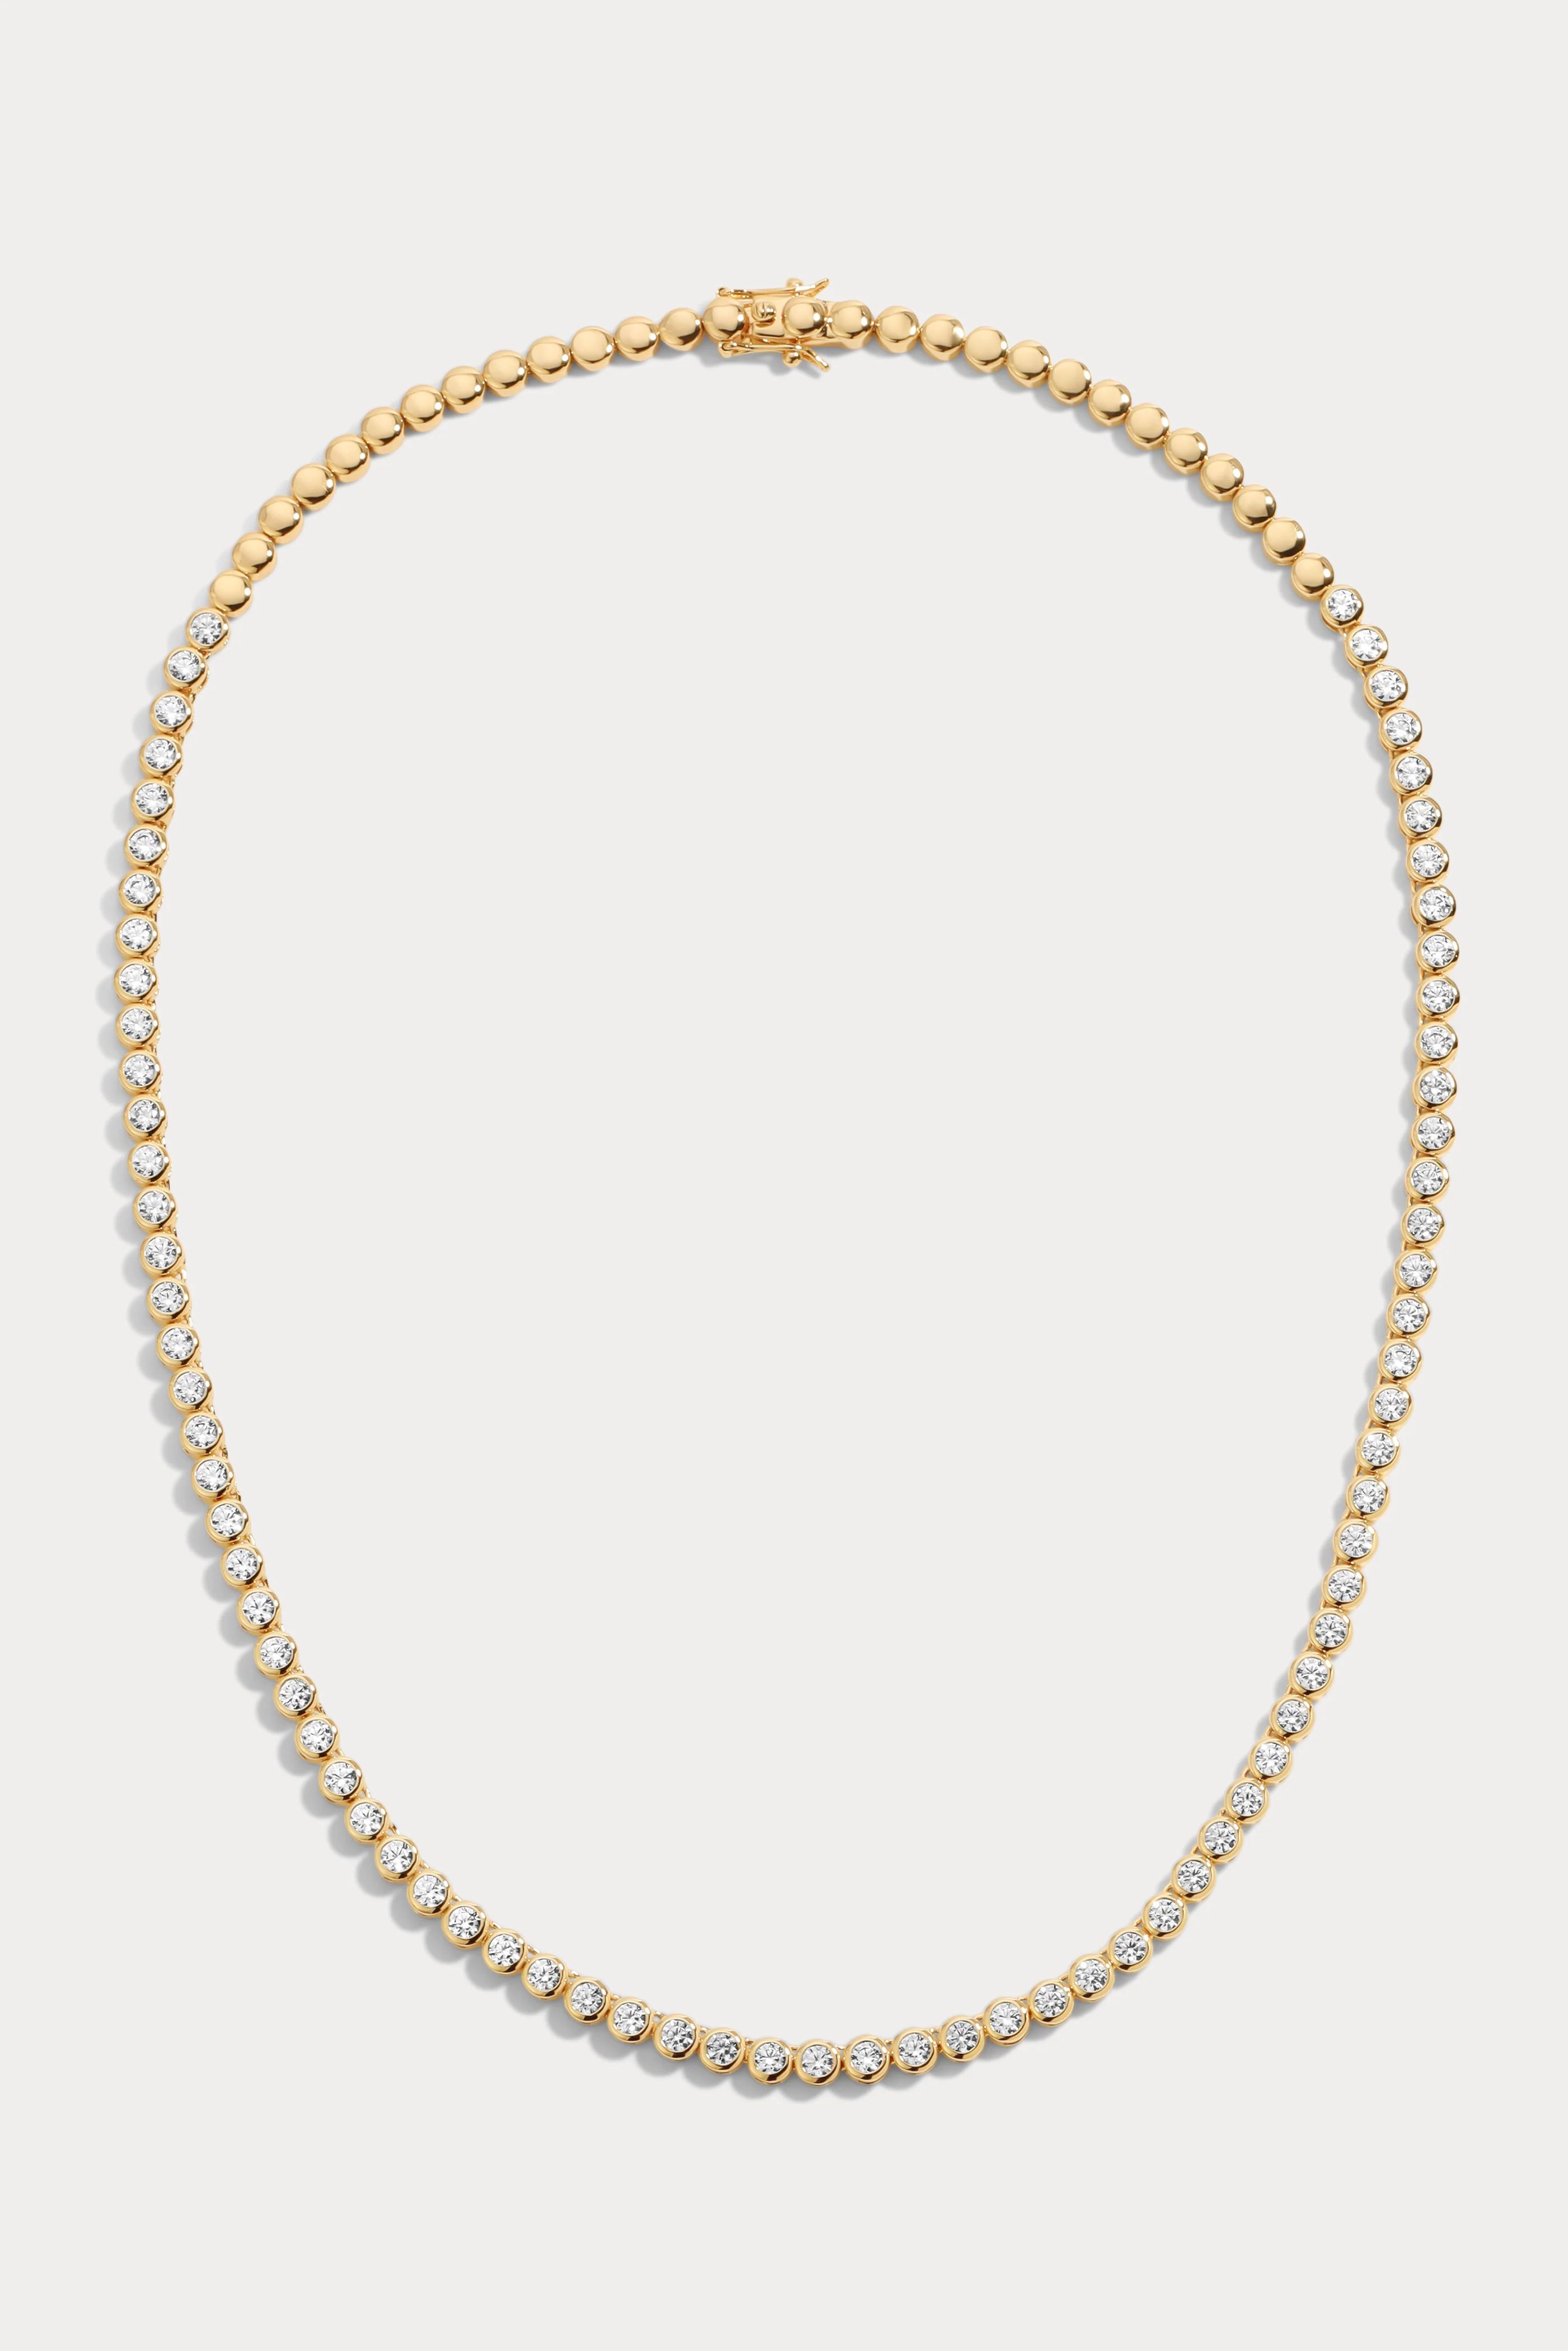 Reese Tennis Necklace | Lili Claspe